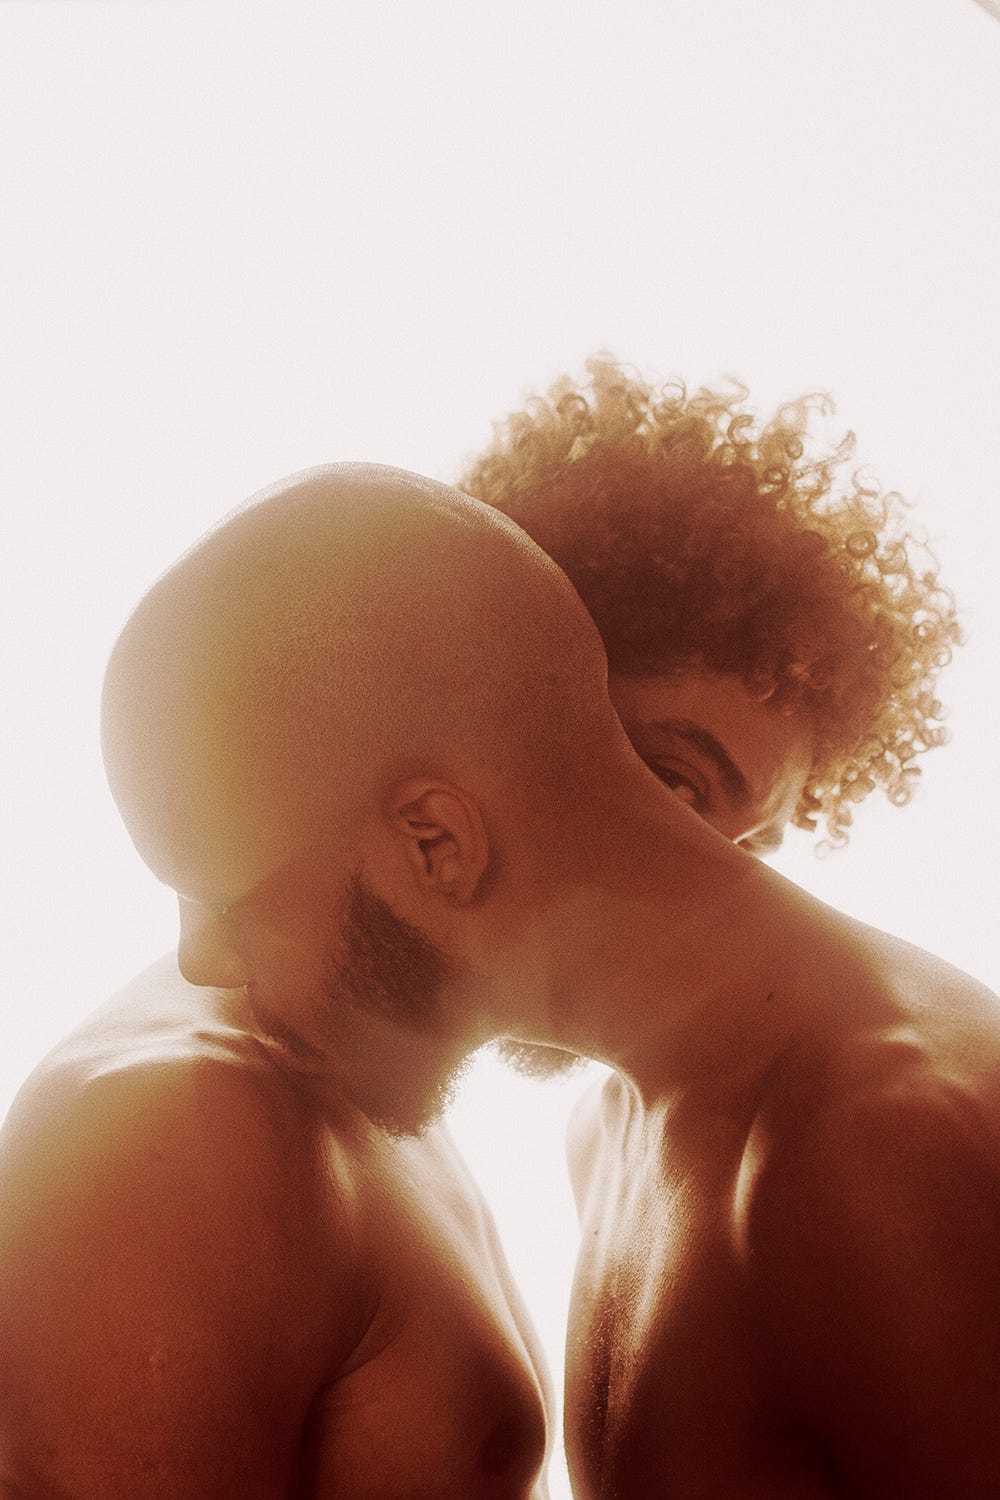 two naked men embracing and kissing while one looks at the camera